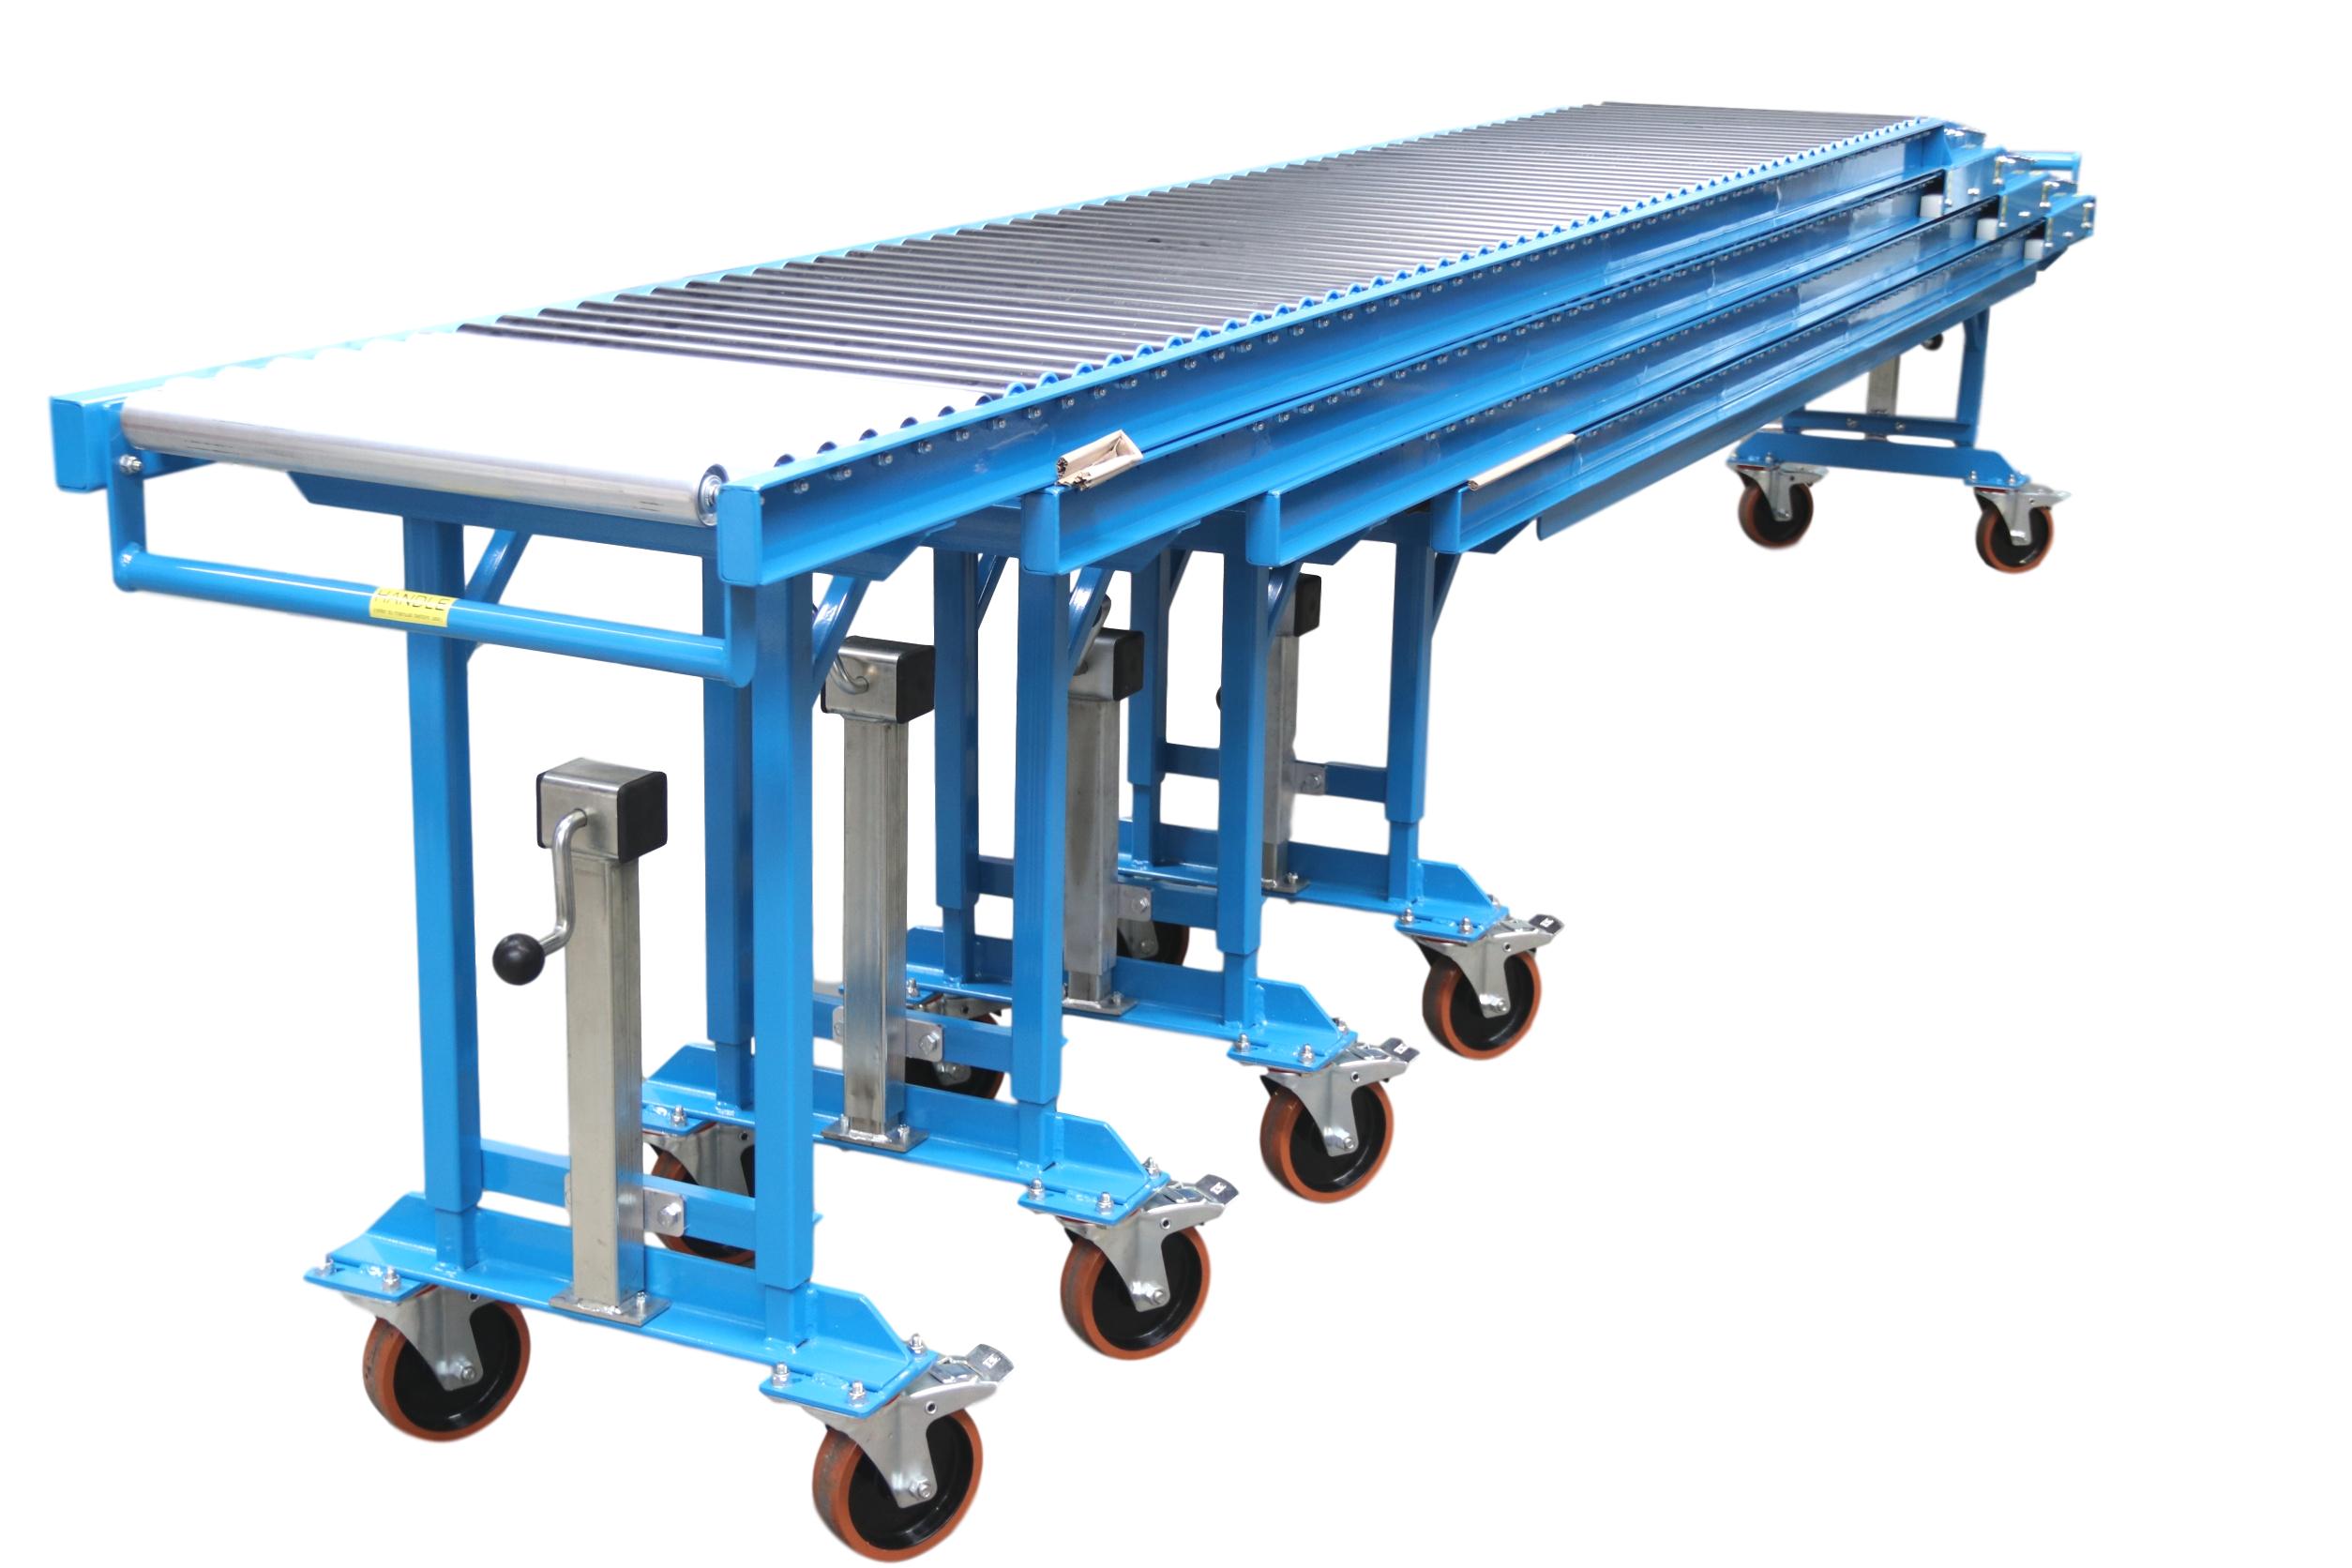 Low Level Container unloading trailer unloading conveyors